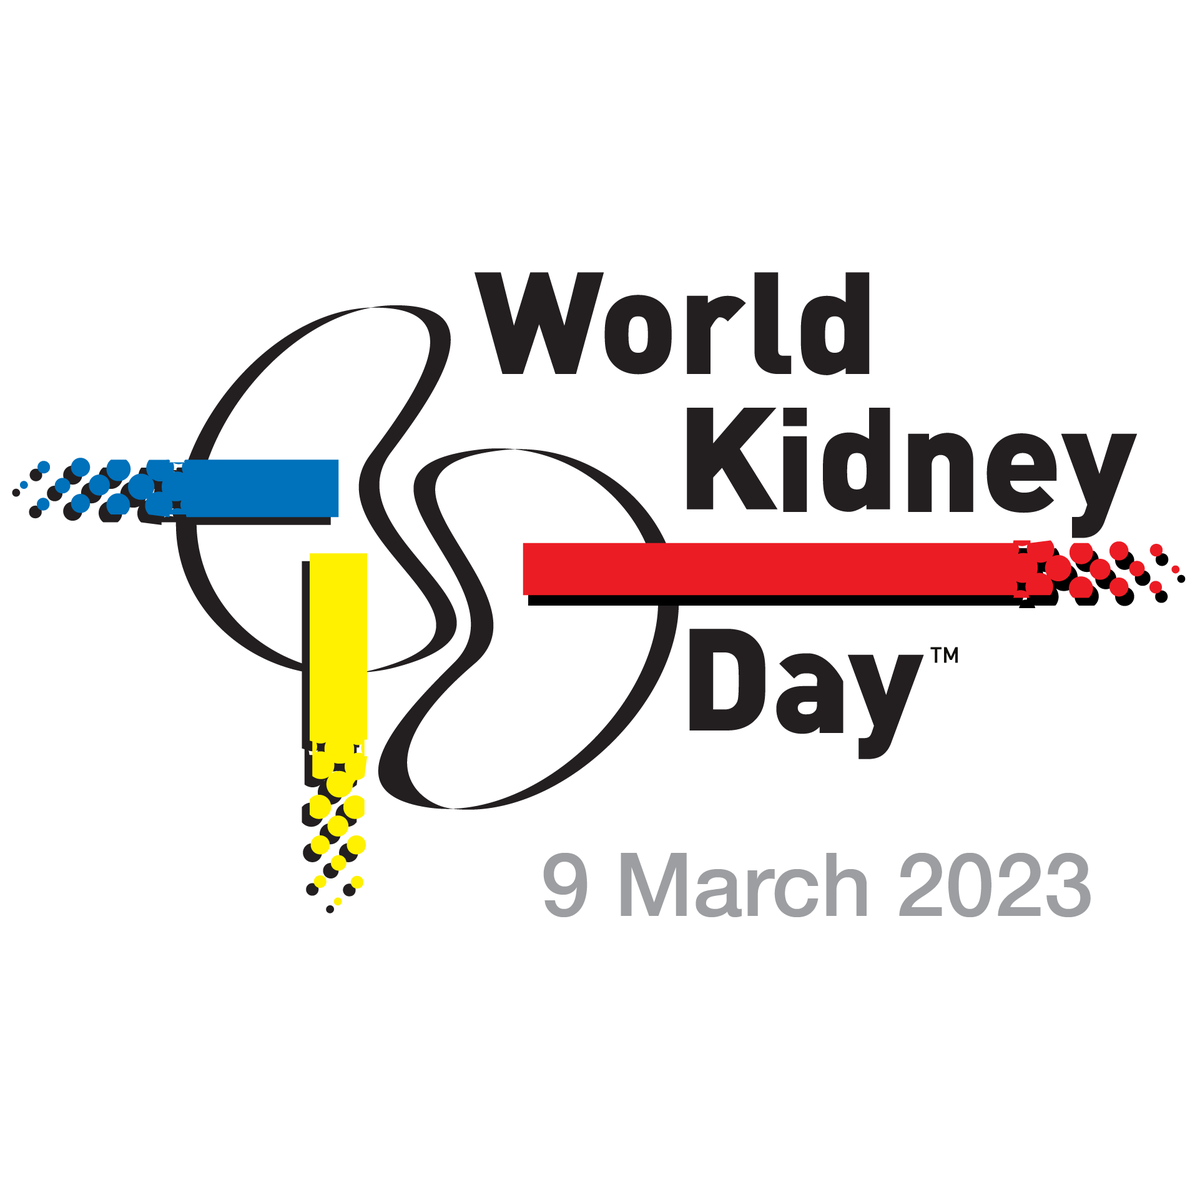 World Kidney Day is a reminder that kidney health is a critical component of overall health. Take care of your kidneys, and they'll take care of you. #HealthyKidneys #WorldKidneyDay